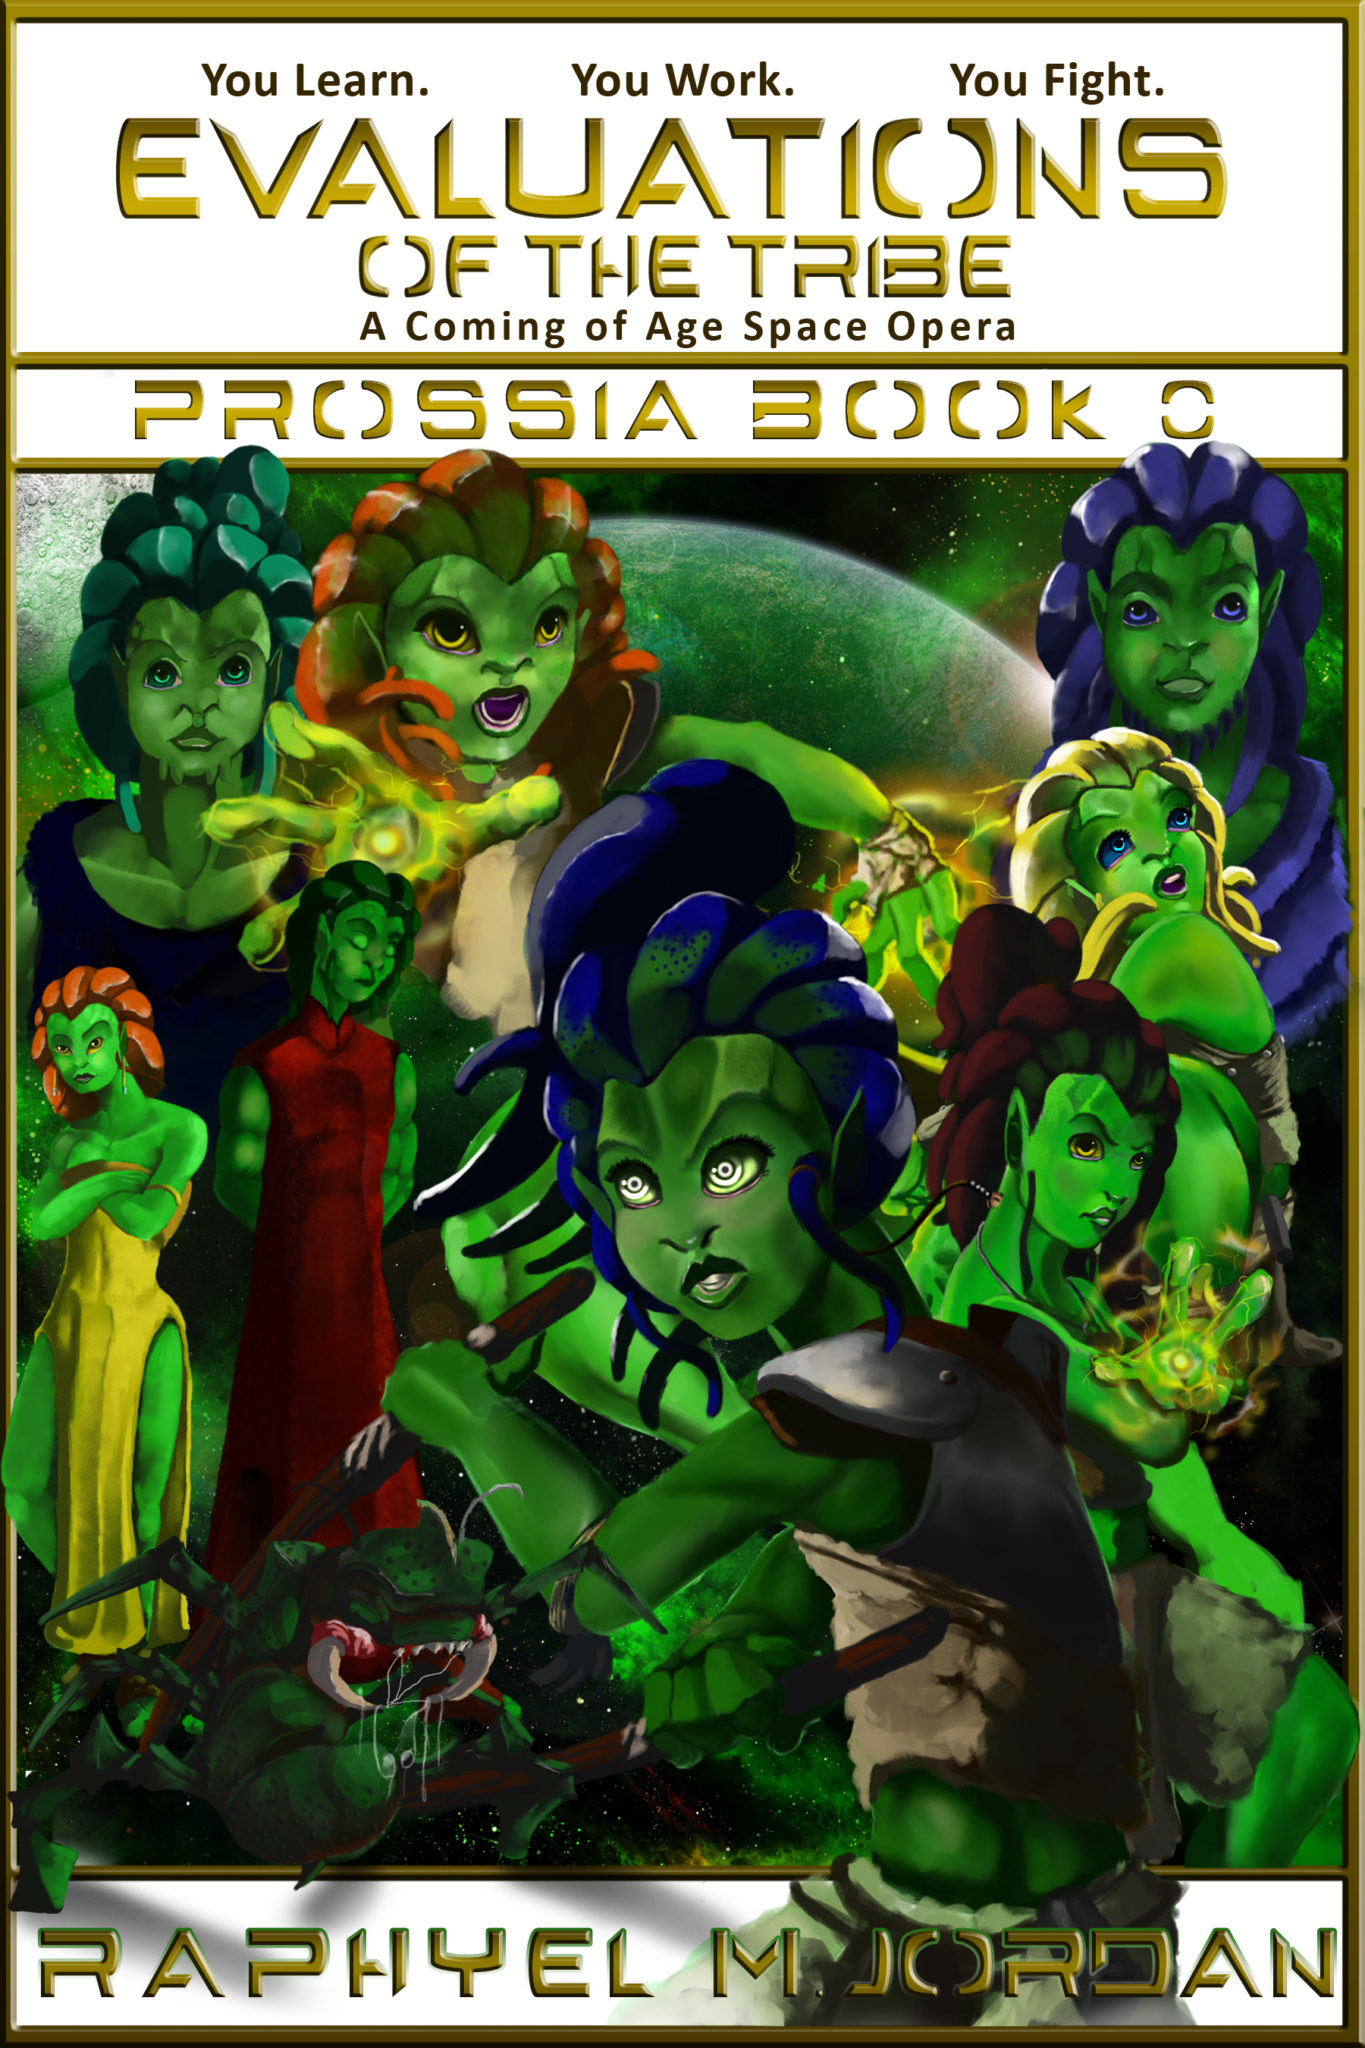 FREE: “Evaluations of the Tribe – Prossia Book o : A coming of Age Space Opera” by Raphyel M. Jordan